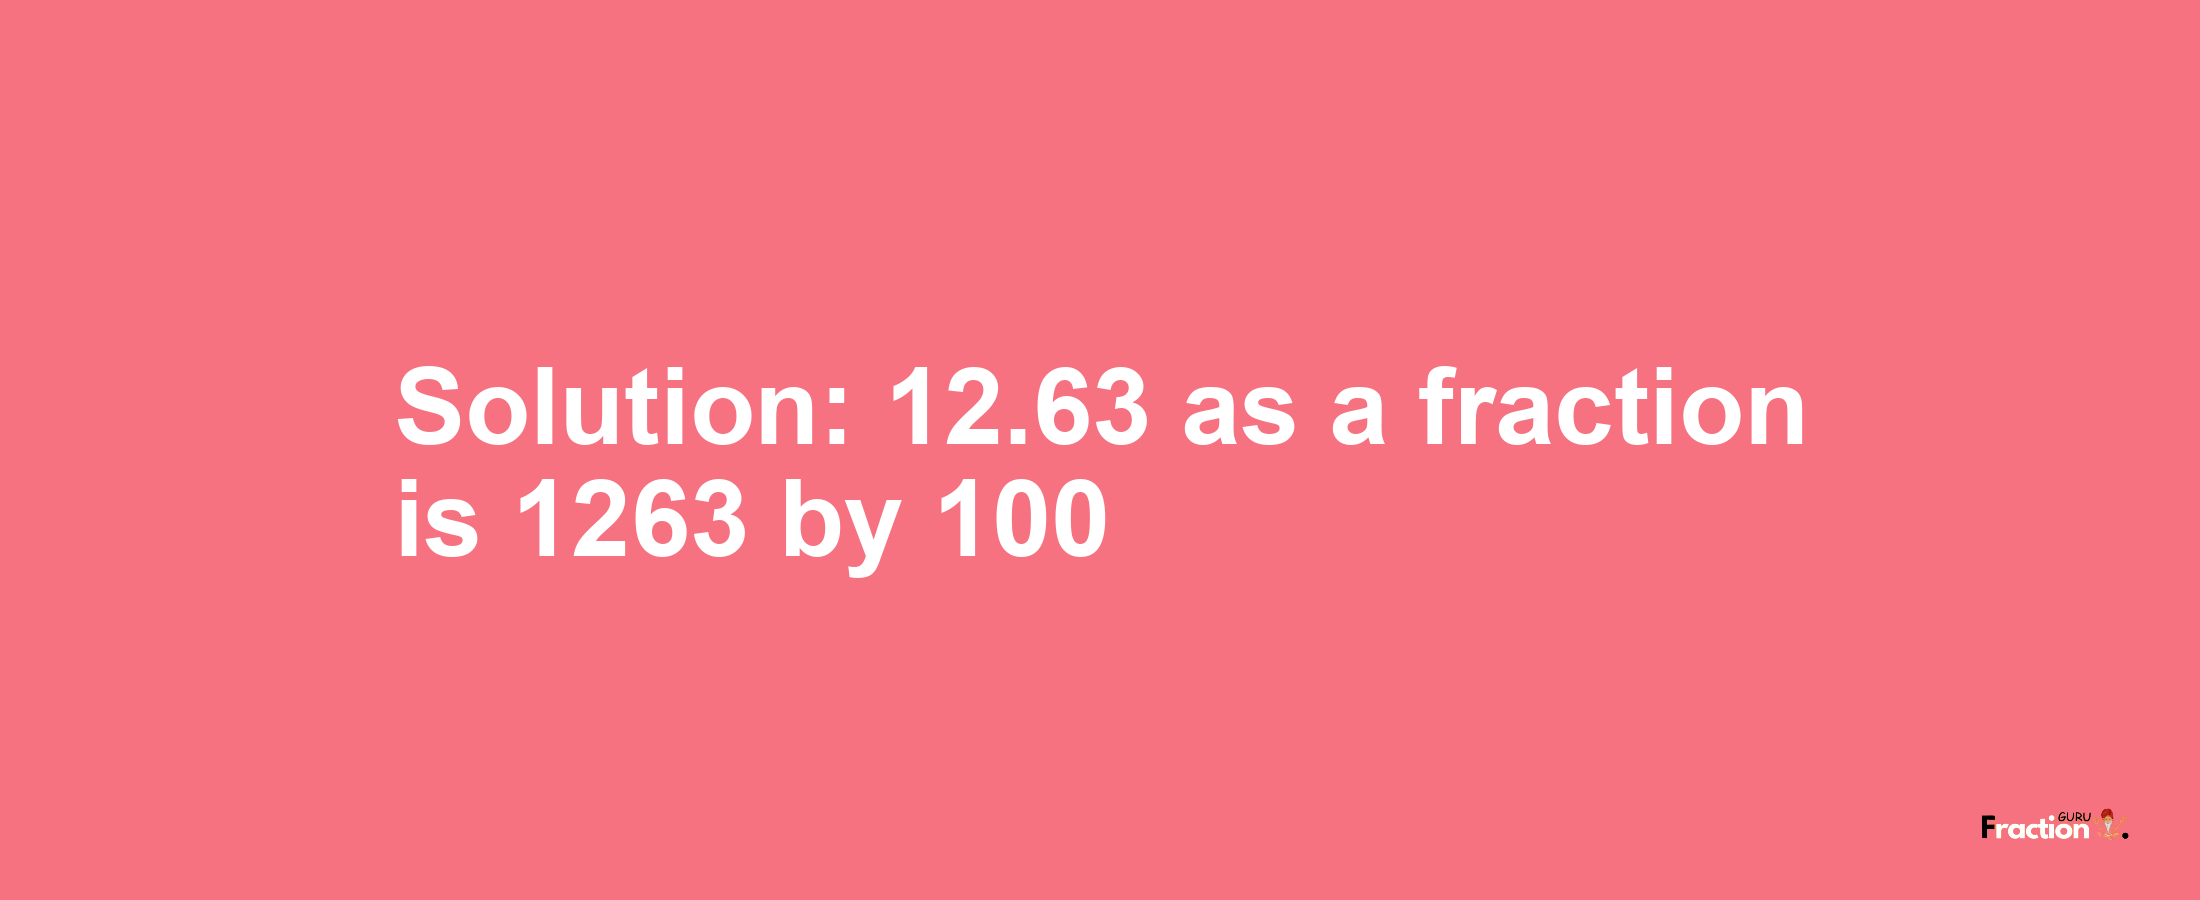 Solution:12.63 as a fraction is 1263/100